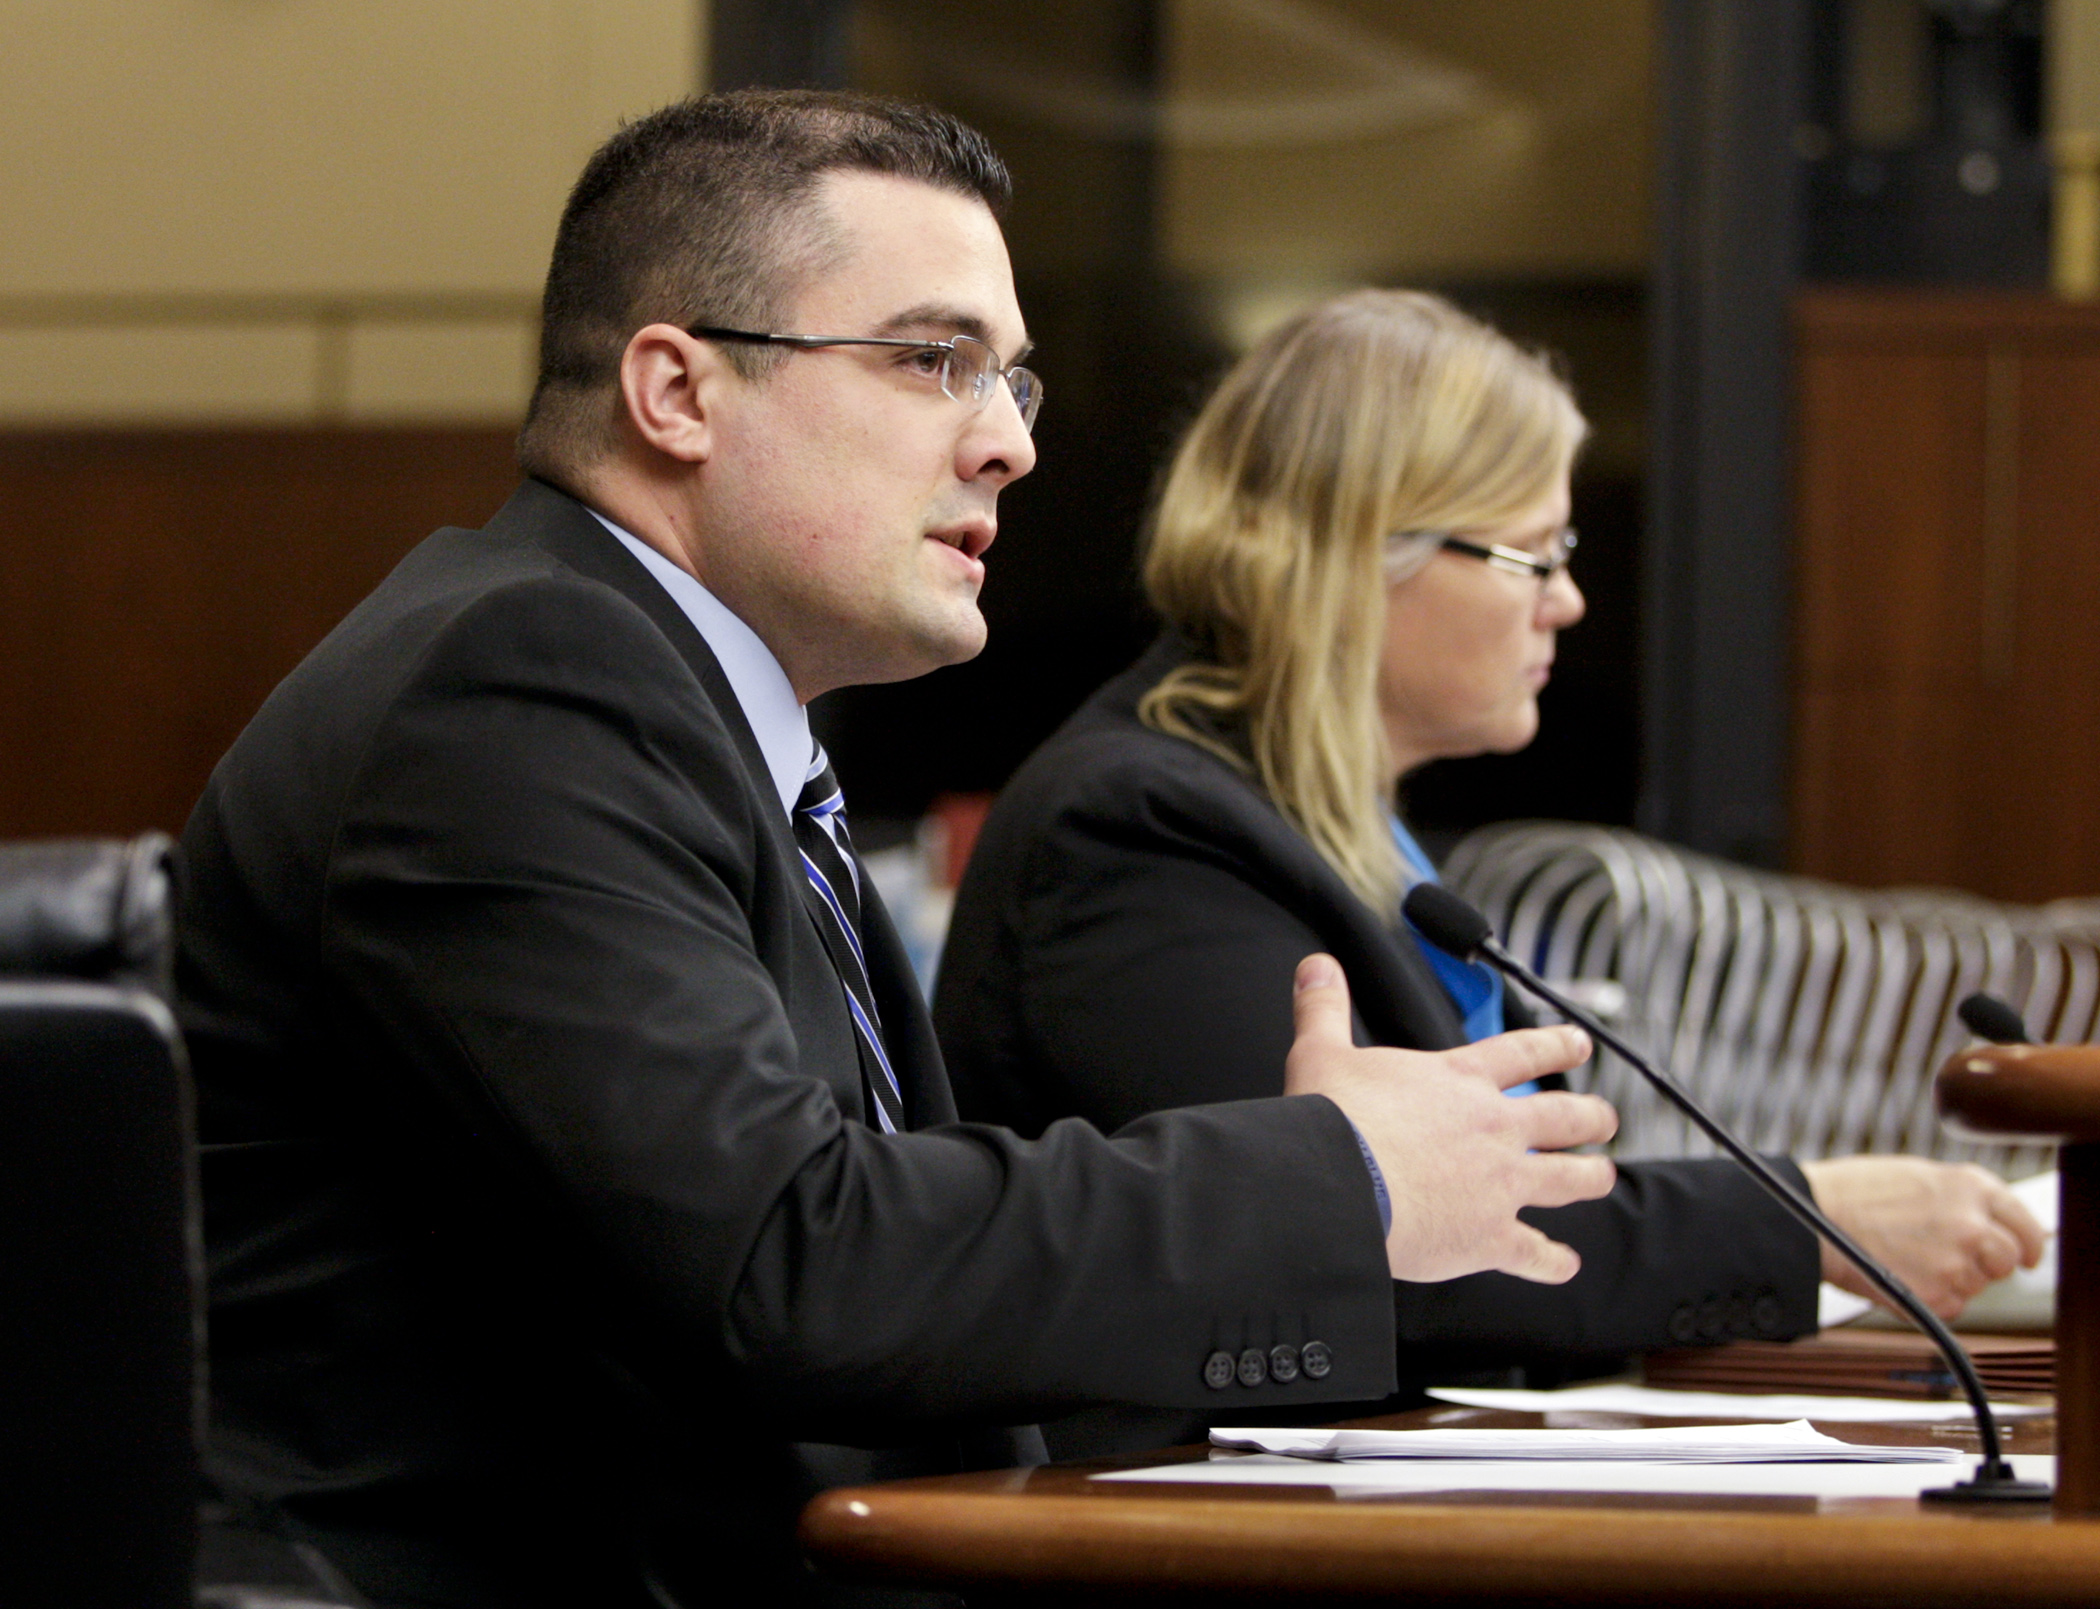 Anoka County Sheriff’s Office Detective Justin Bloch testifies March 11 in favor of HF1433, sponsored by Rep. Debra Hilstrom, right, which would prohibit video recording without consent in restrooms, locker rooms and changing rooms. Photo by Paul Battaglia